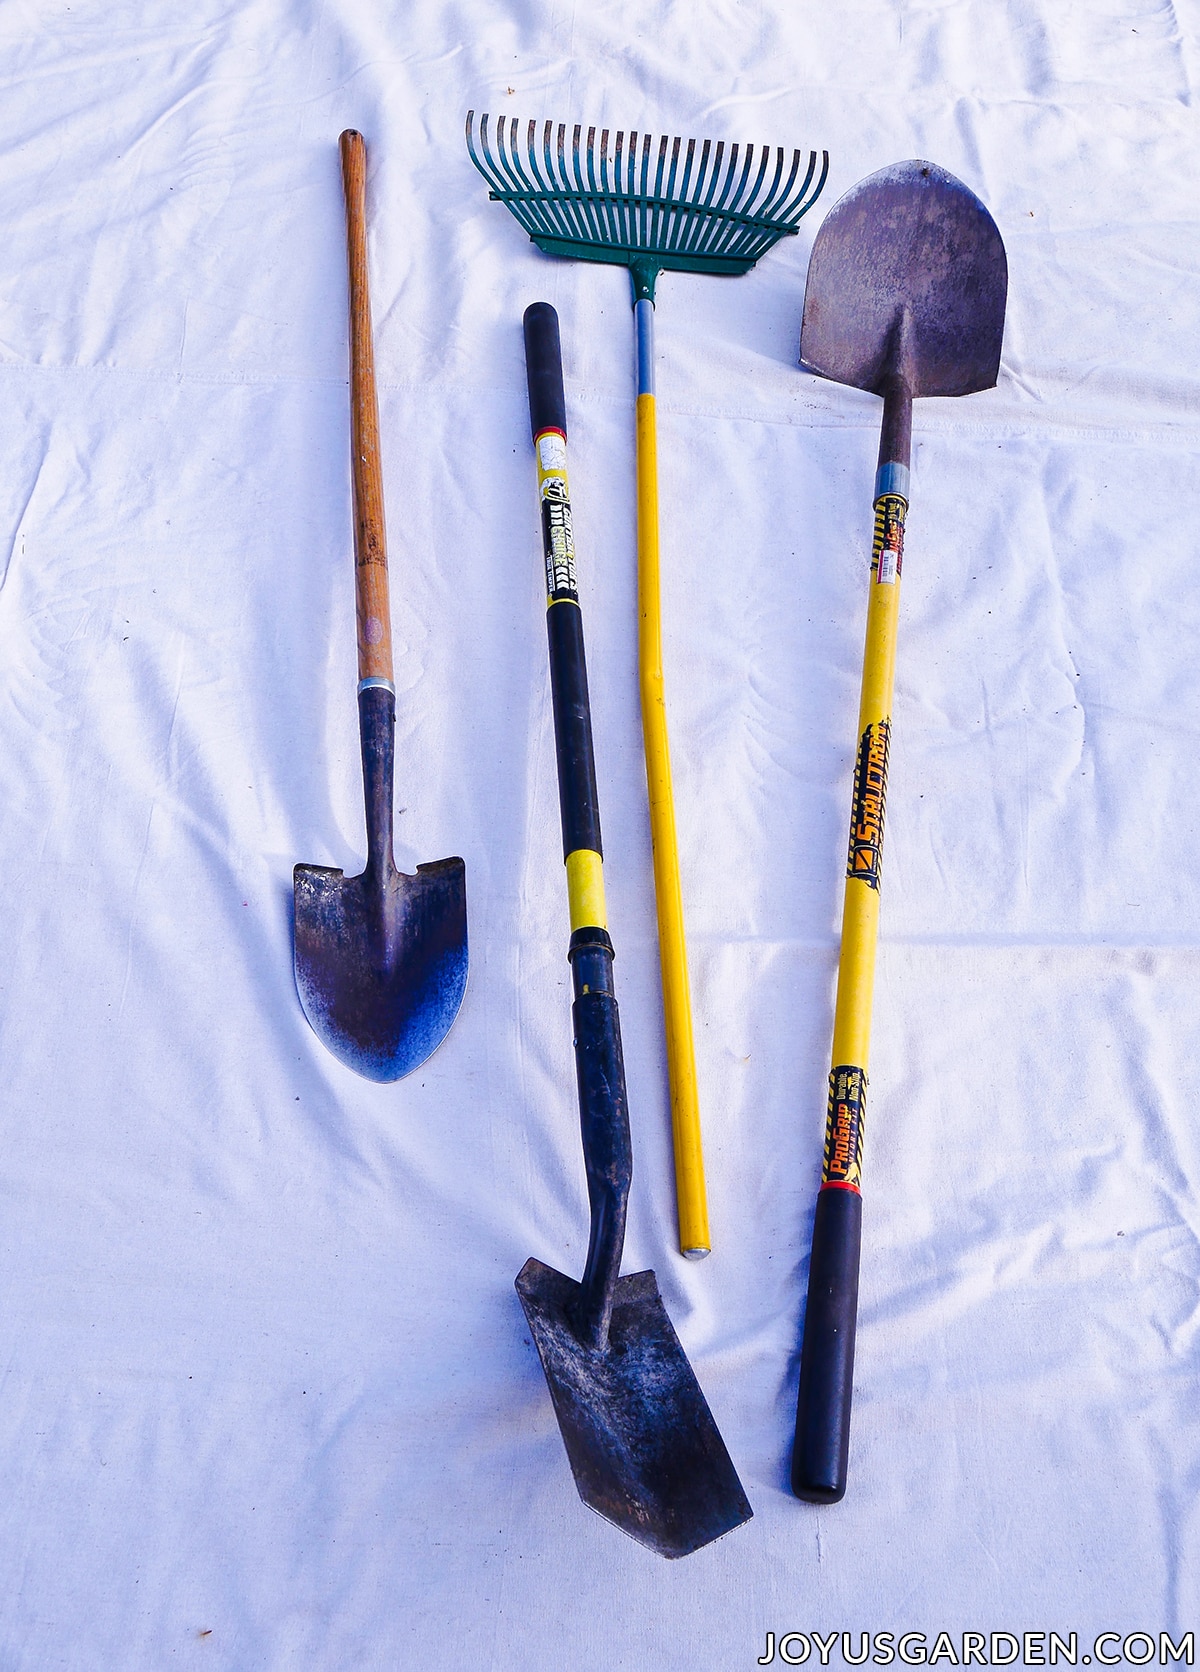 Three different shovels & a rake used for gardening.